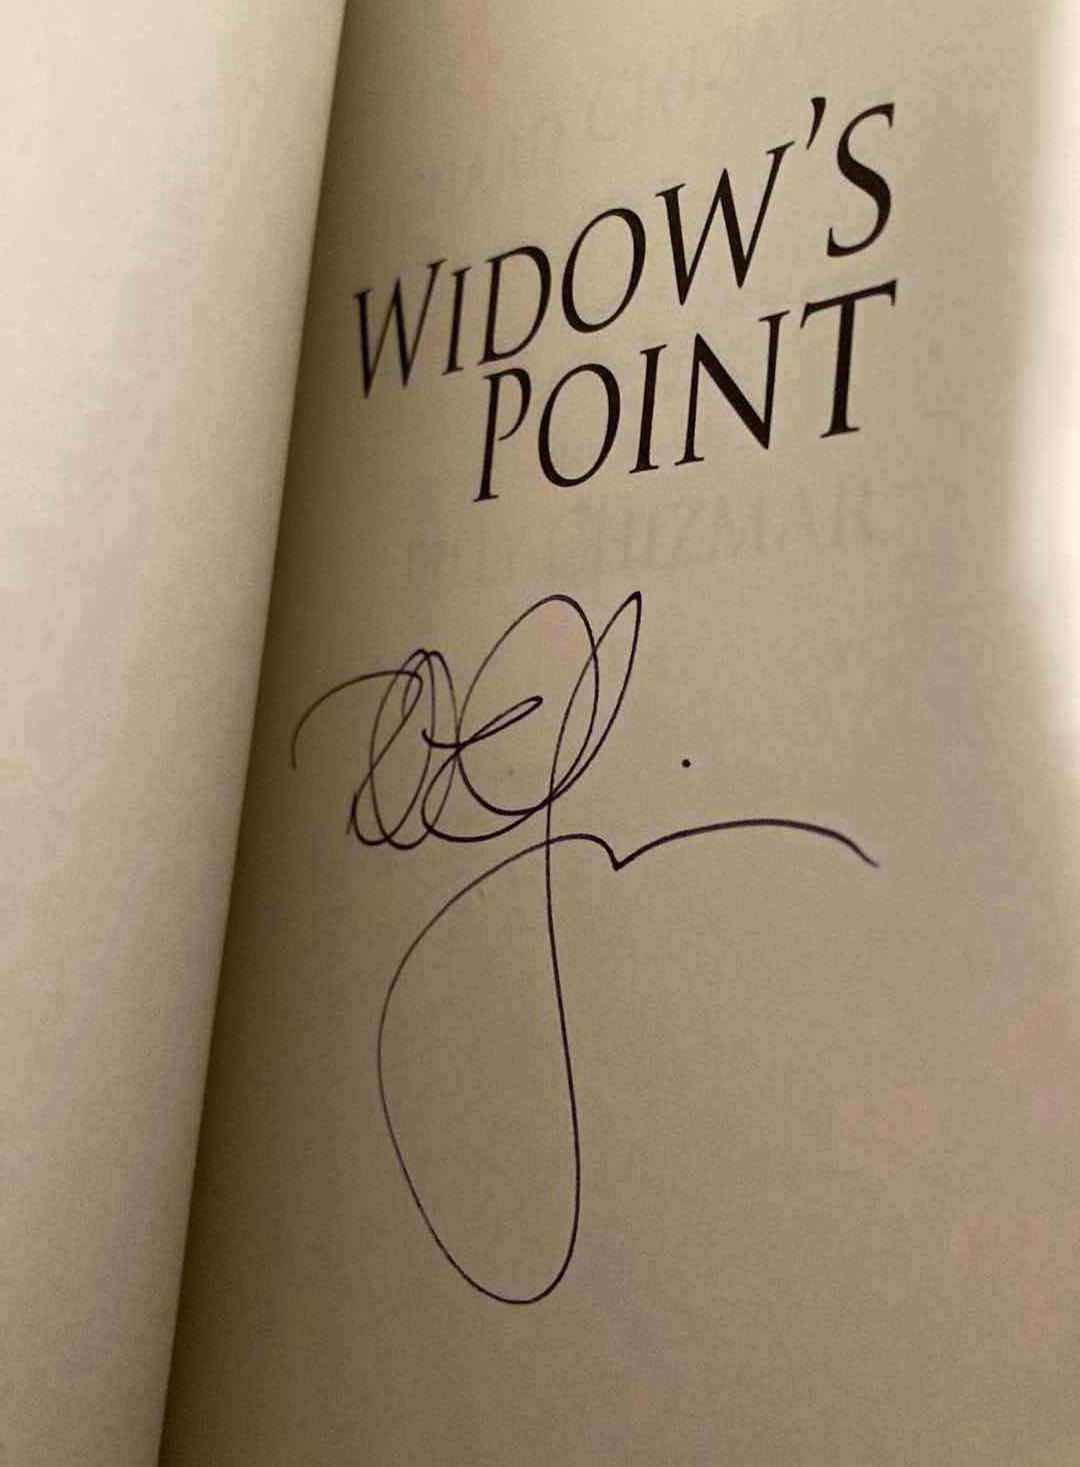 Photo 3 of RICHARD CHIZMAR & BILLY CHIZMAR - WIDOW’S POINT BOOK SIGNED BY RICHARD CHIZMAR